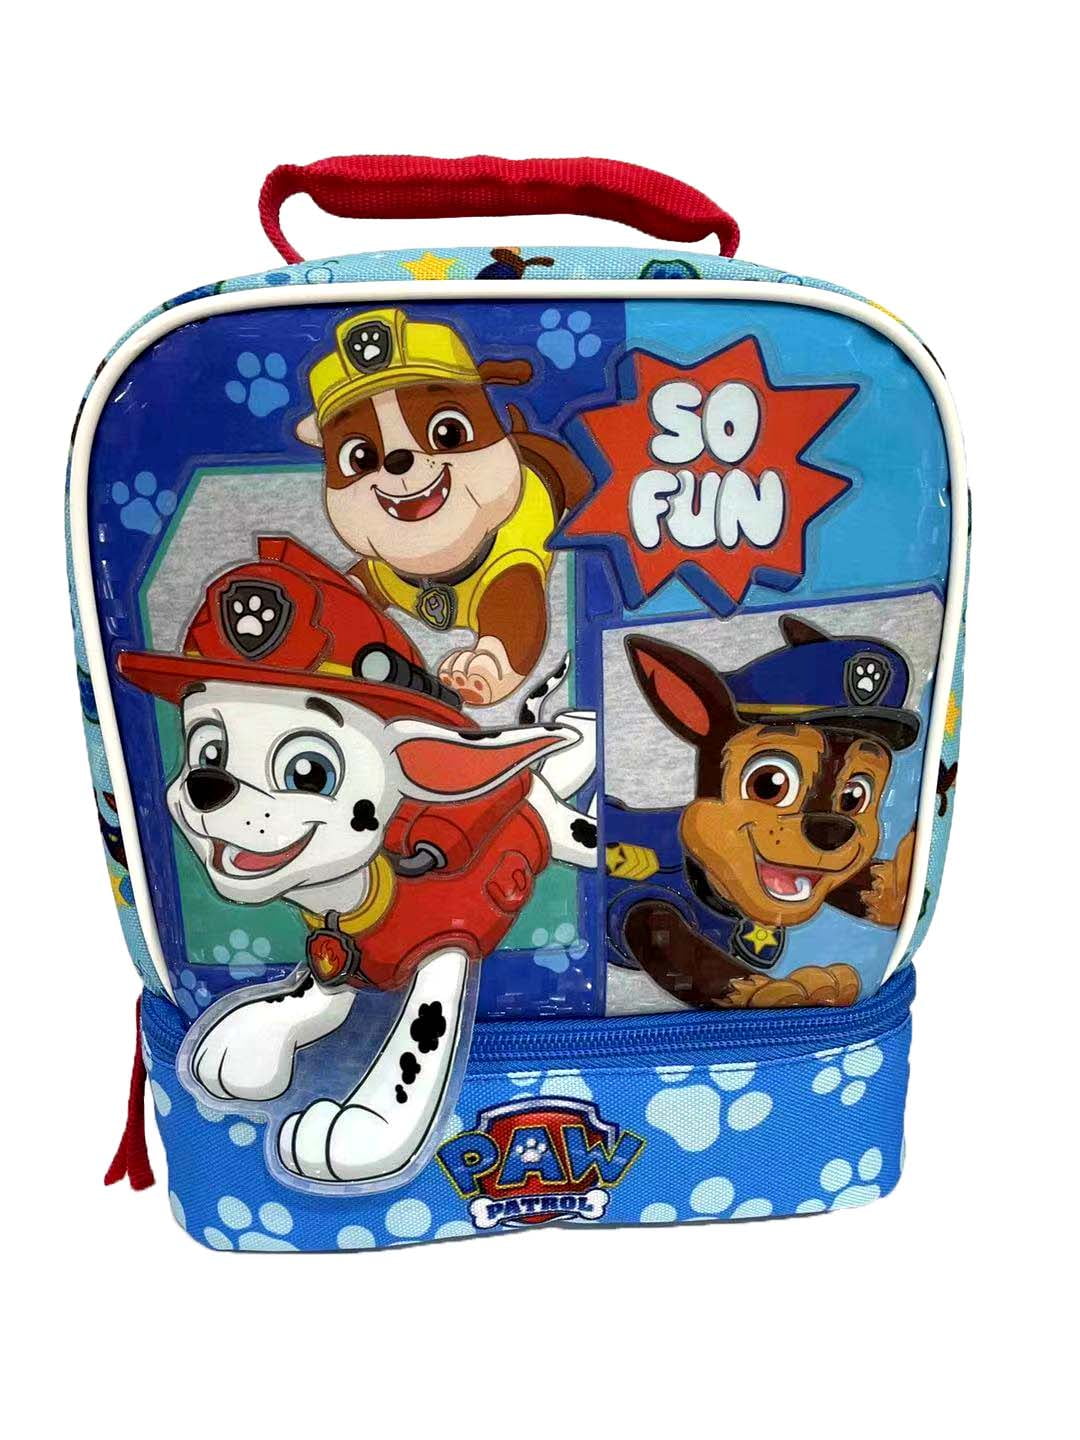 Paw Patrol Lunch Box with the Whole Gang on Front Details about   New Water holder side 